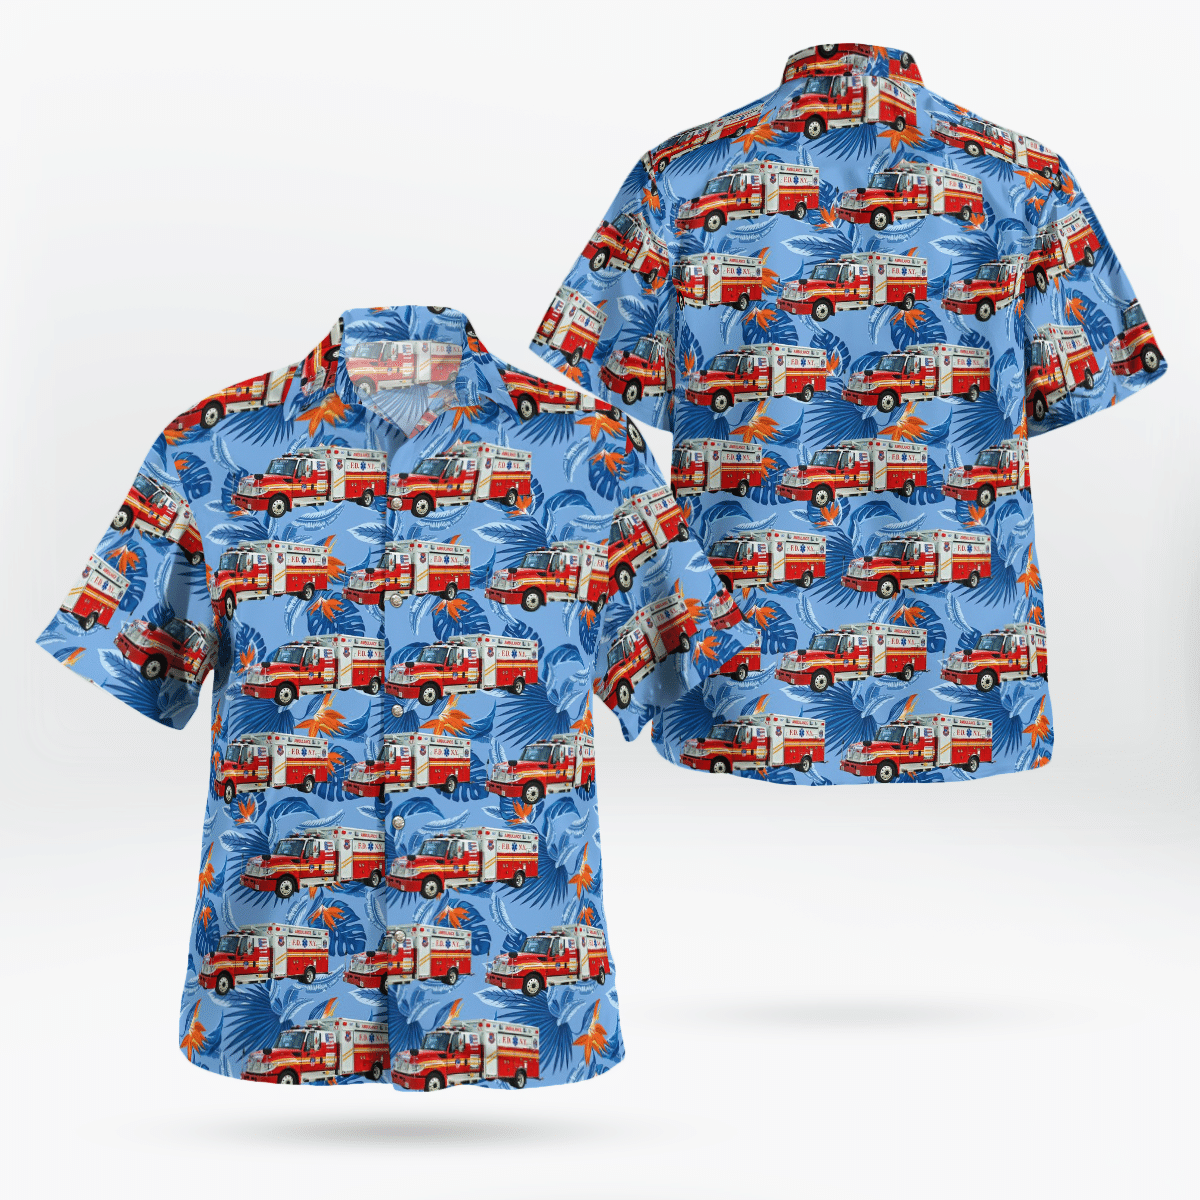 Shop now to find the perfect Hawaii Shirt for your hobby 20